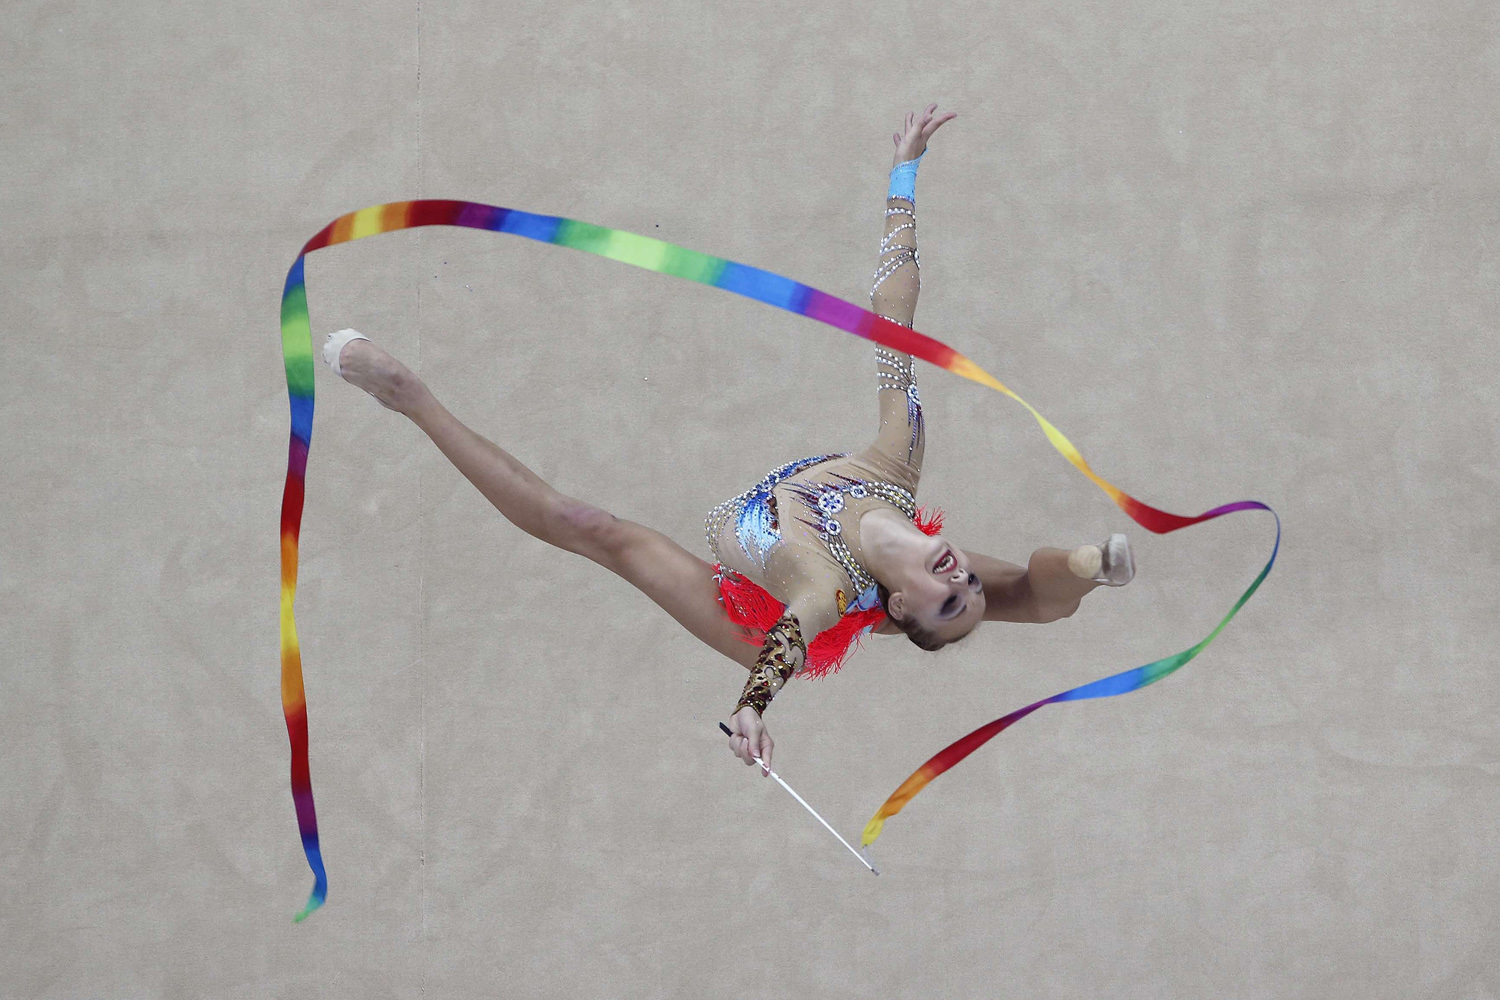 Russian's Irina Annenkova competes during the rhythmic gymnastics individual all-around final match at the 2014 Nanjing Youth Olympic Games in Nanjing